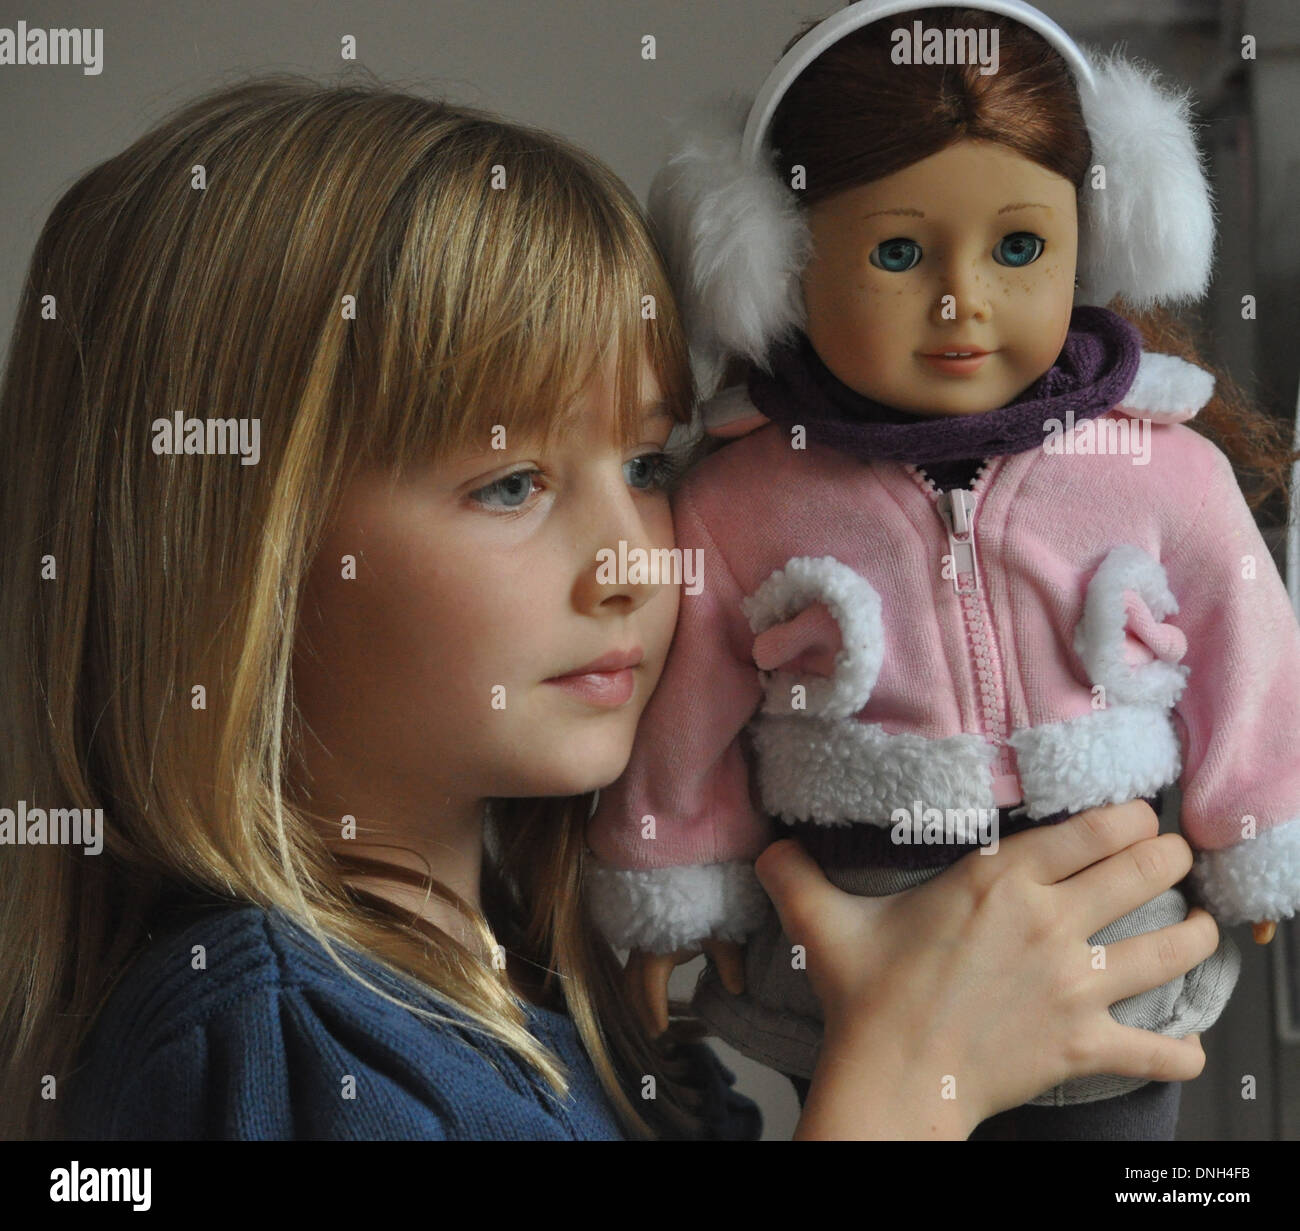 portrait of pretty blonde girl holding doll and looking out of window Stock Photo